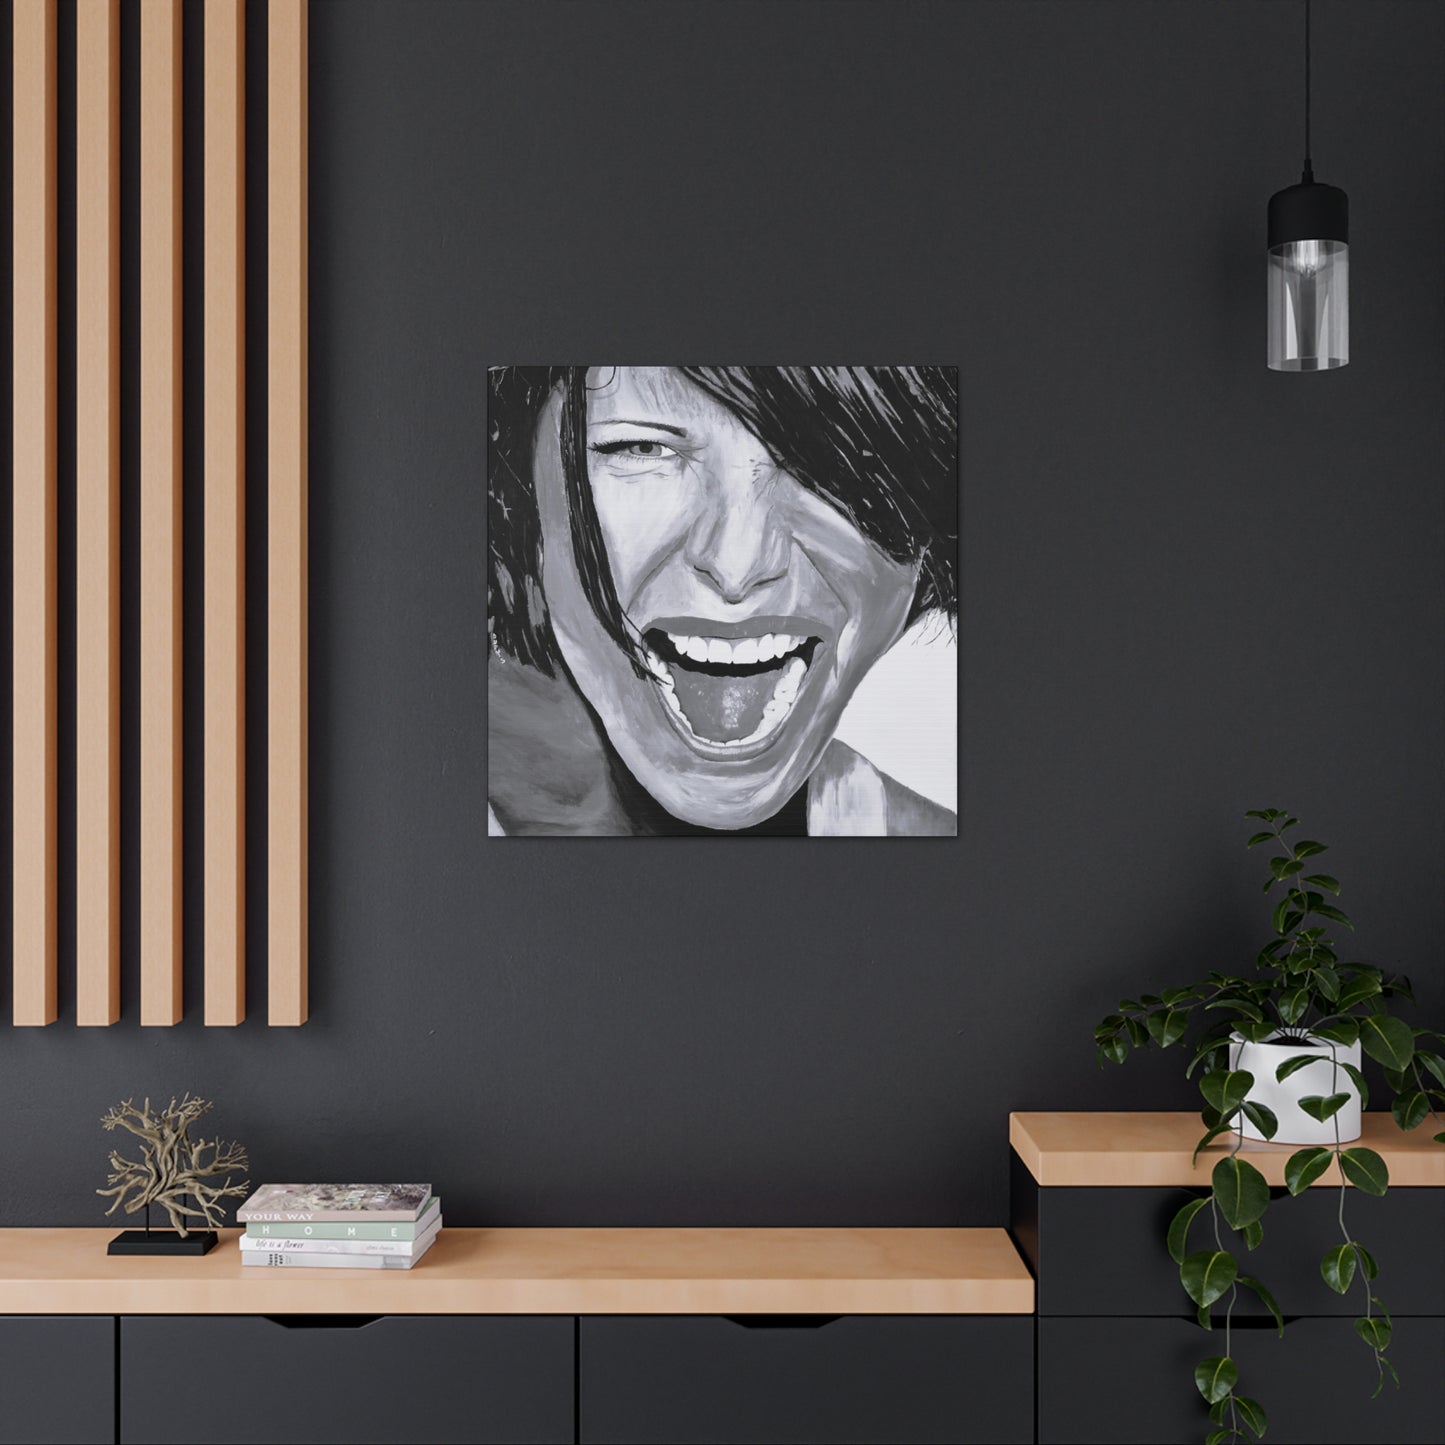 A small Black and White art print on canvas of a passionate woman showing emotion, hanging on a wall over a desk